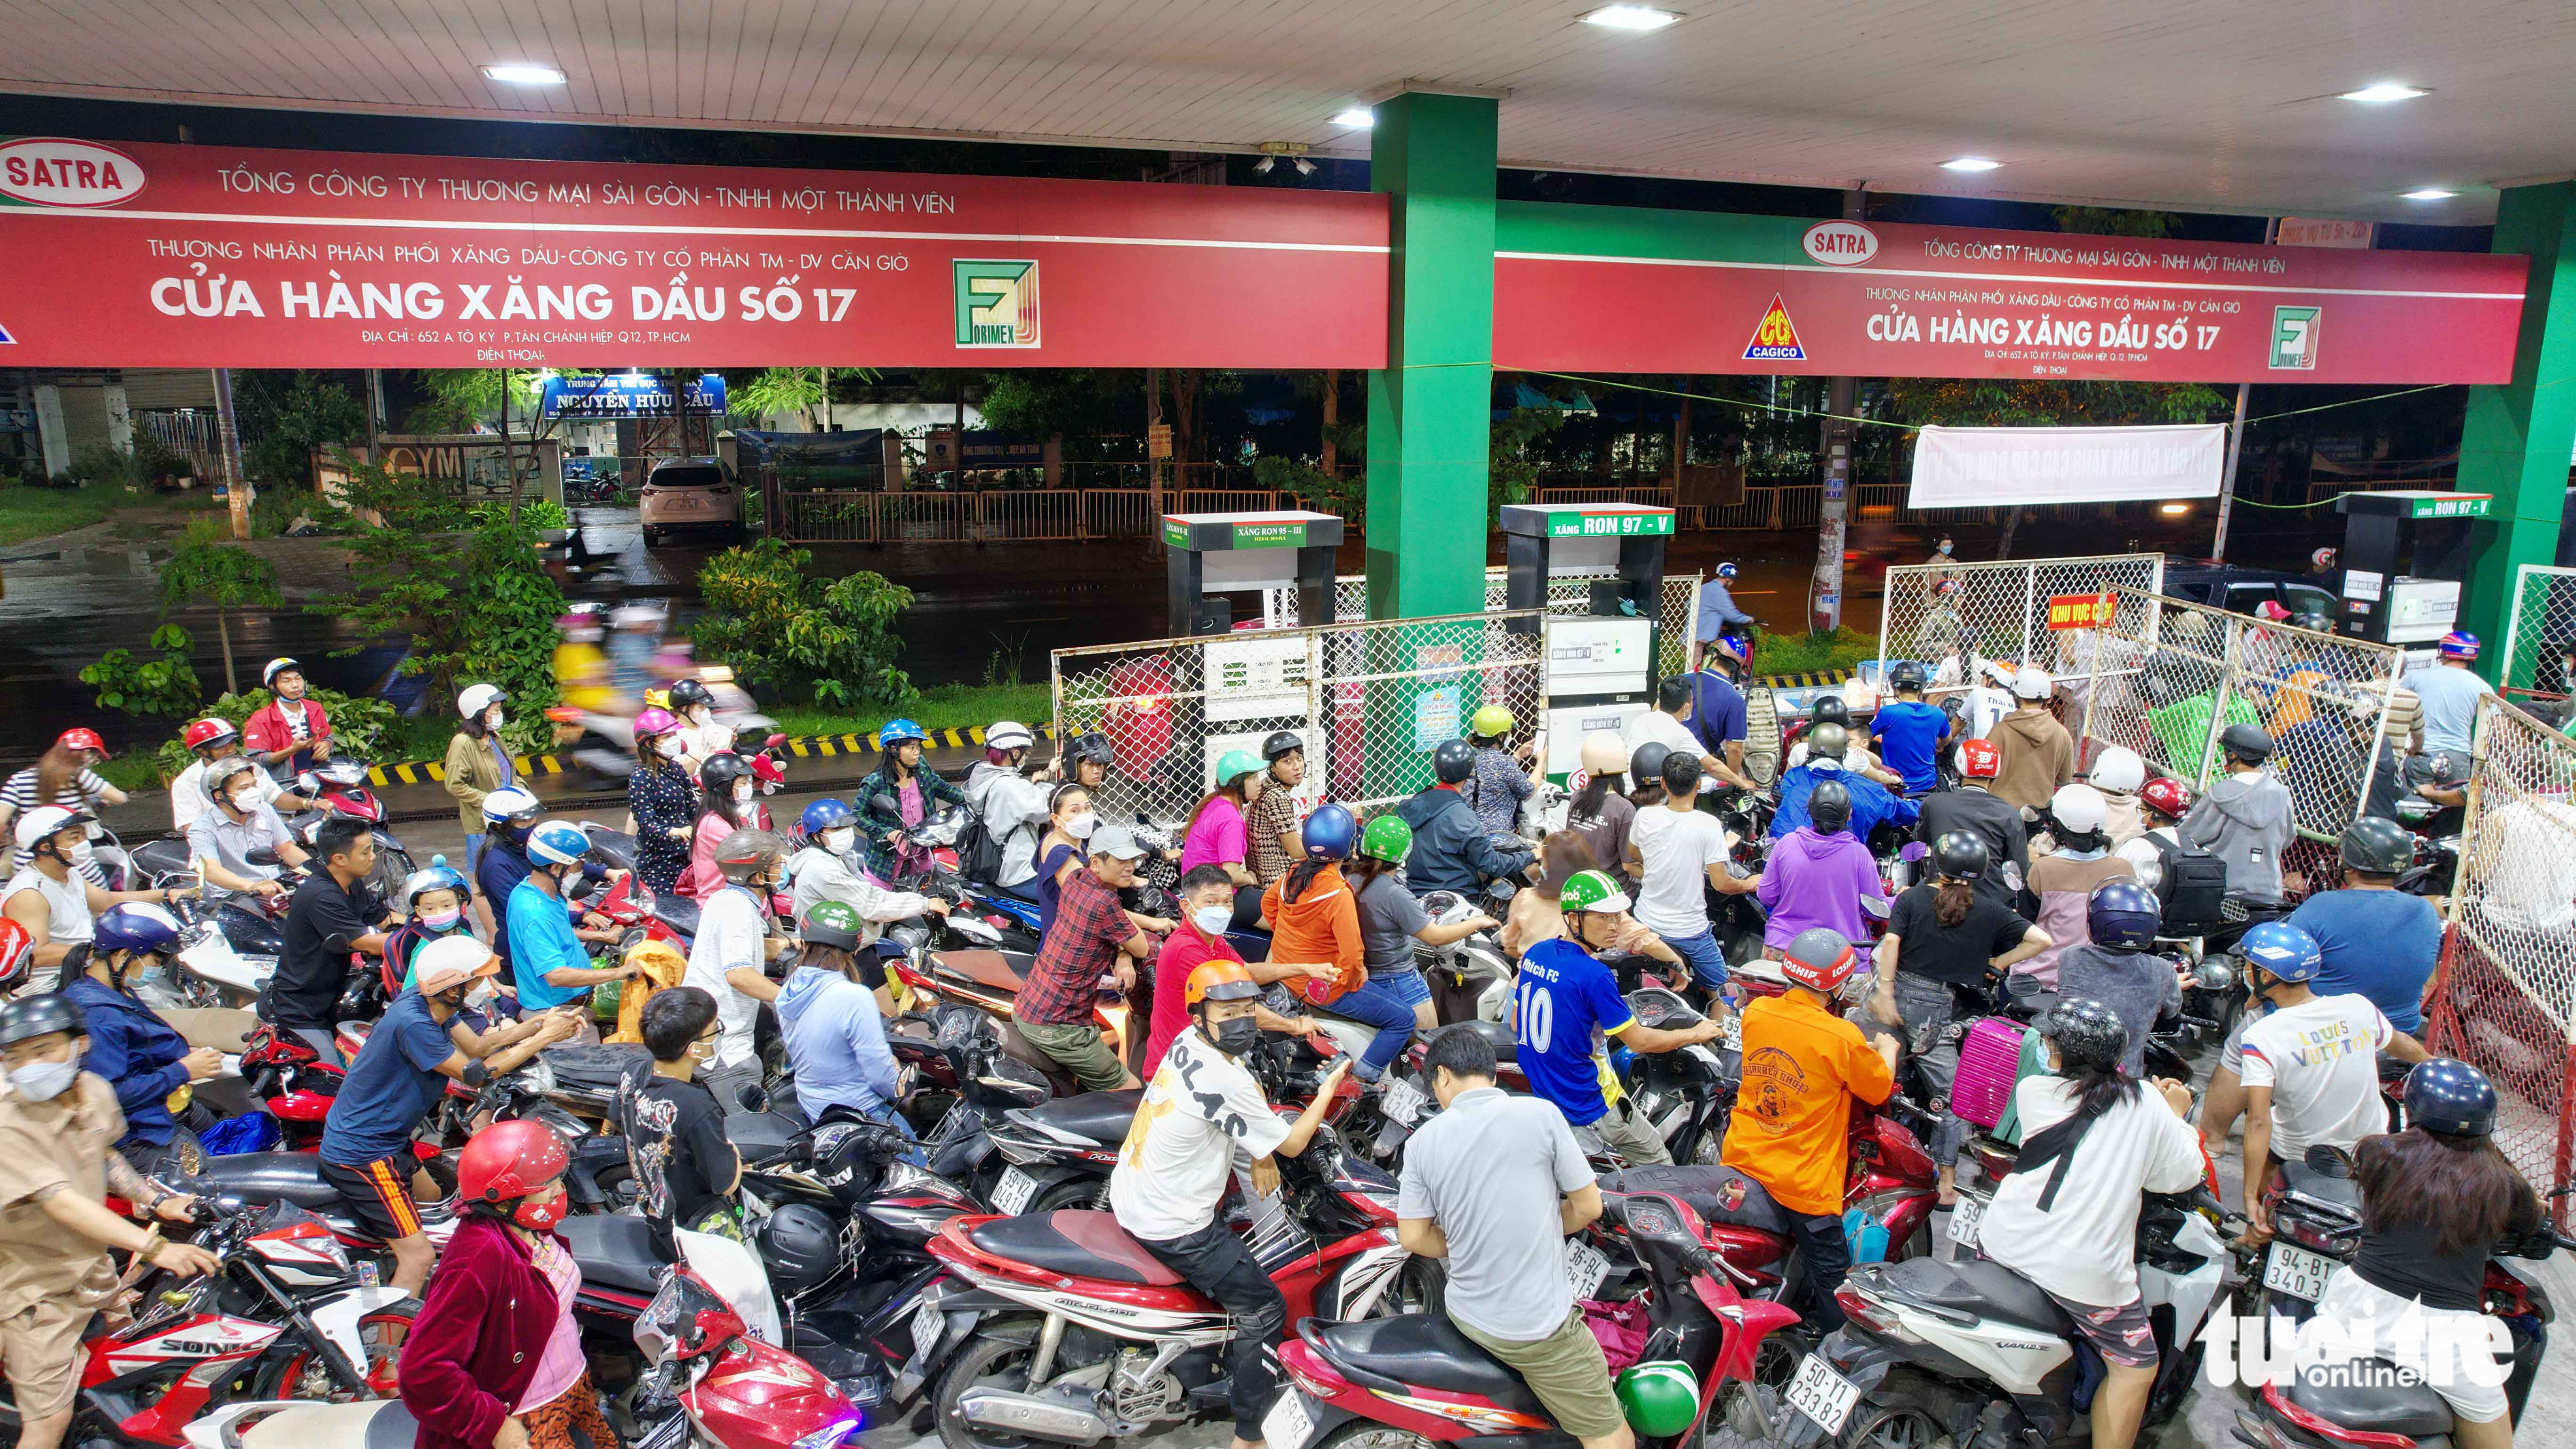 Ho Chi Minh City residents compete to buy gasoline as filling stations shut down over supply shortage